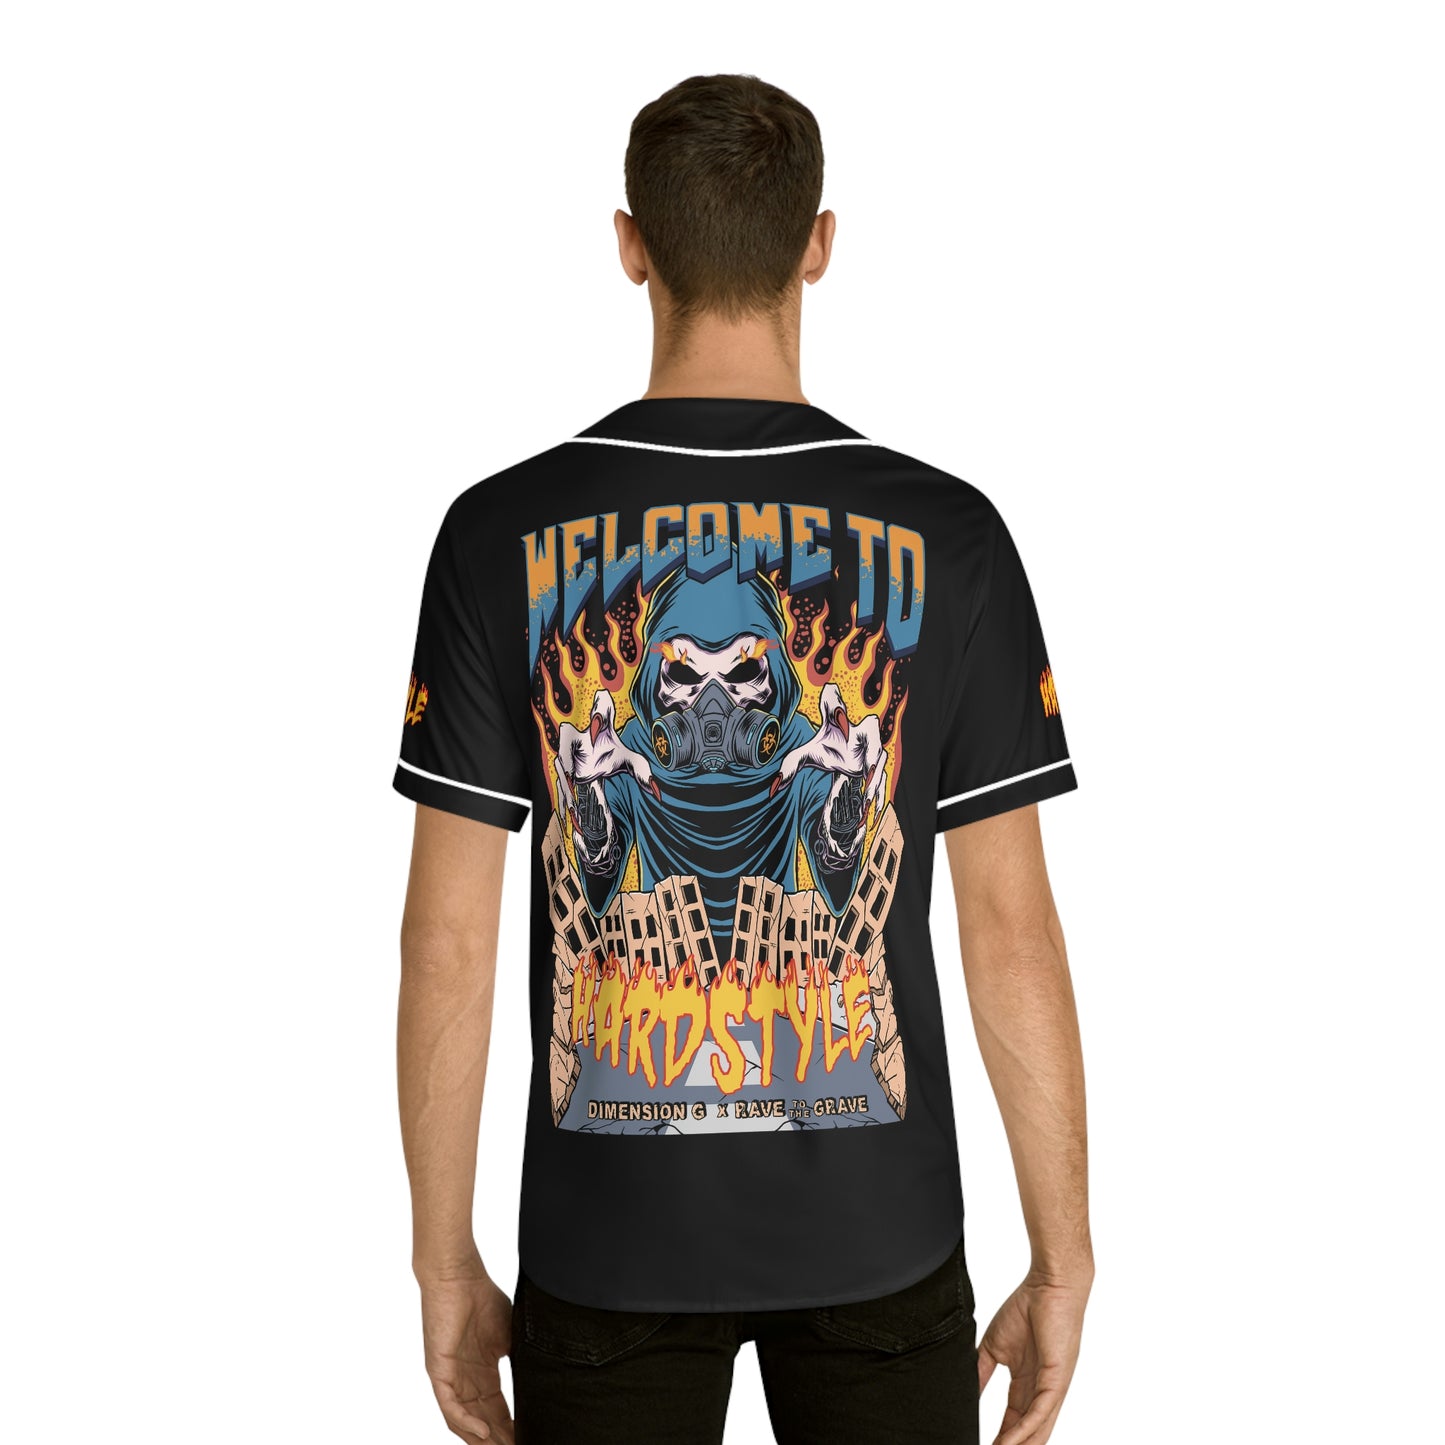 Welcome to Hardstyle Jersey